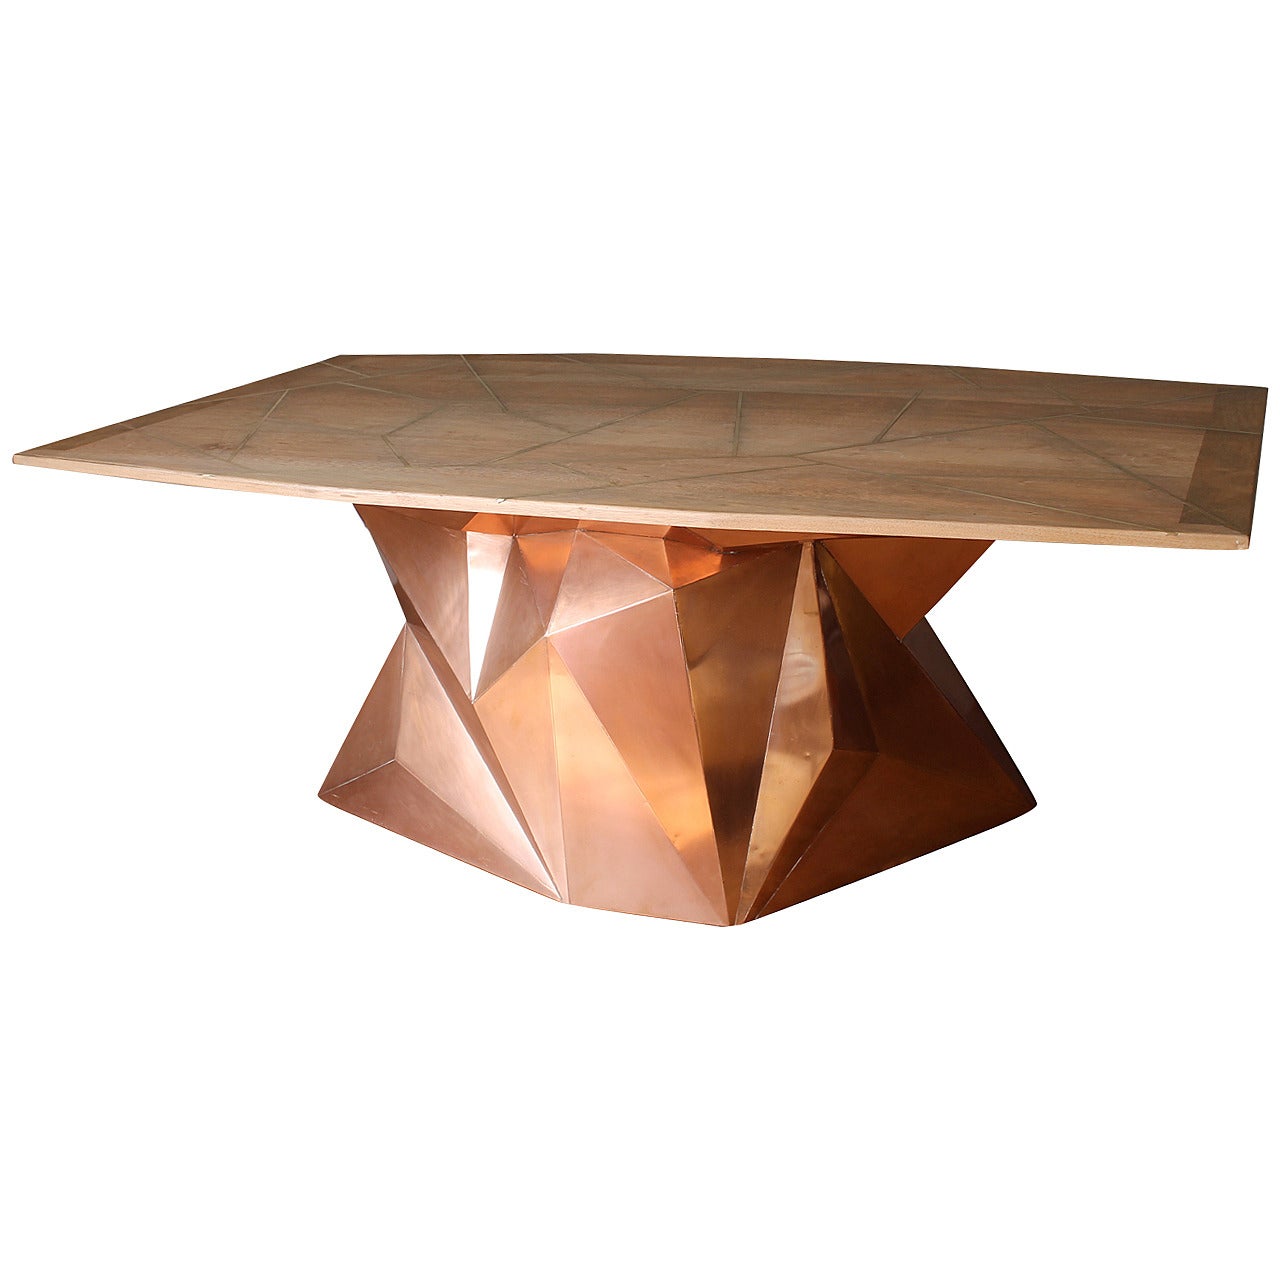 Faceted  "Nomada" Cooper Dining Table or Desk  by Alberto Vieyra. USA, 2010.